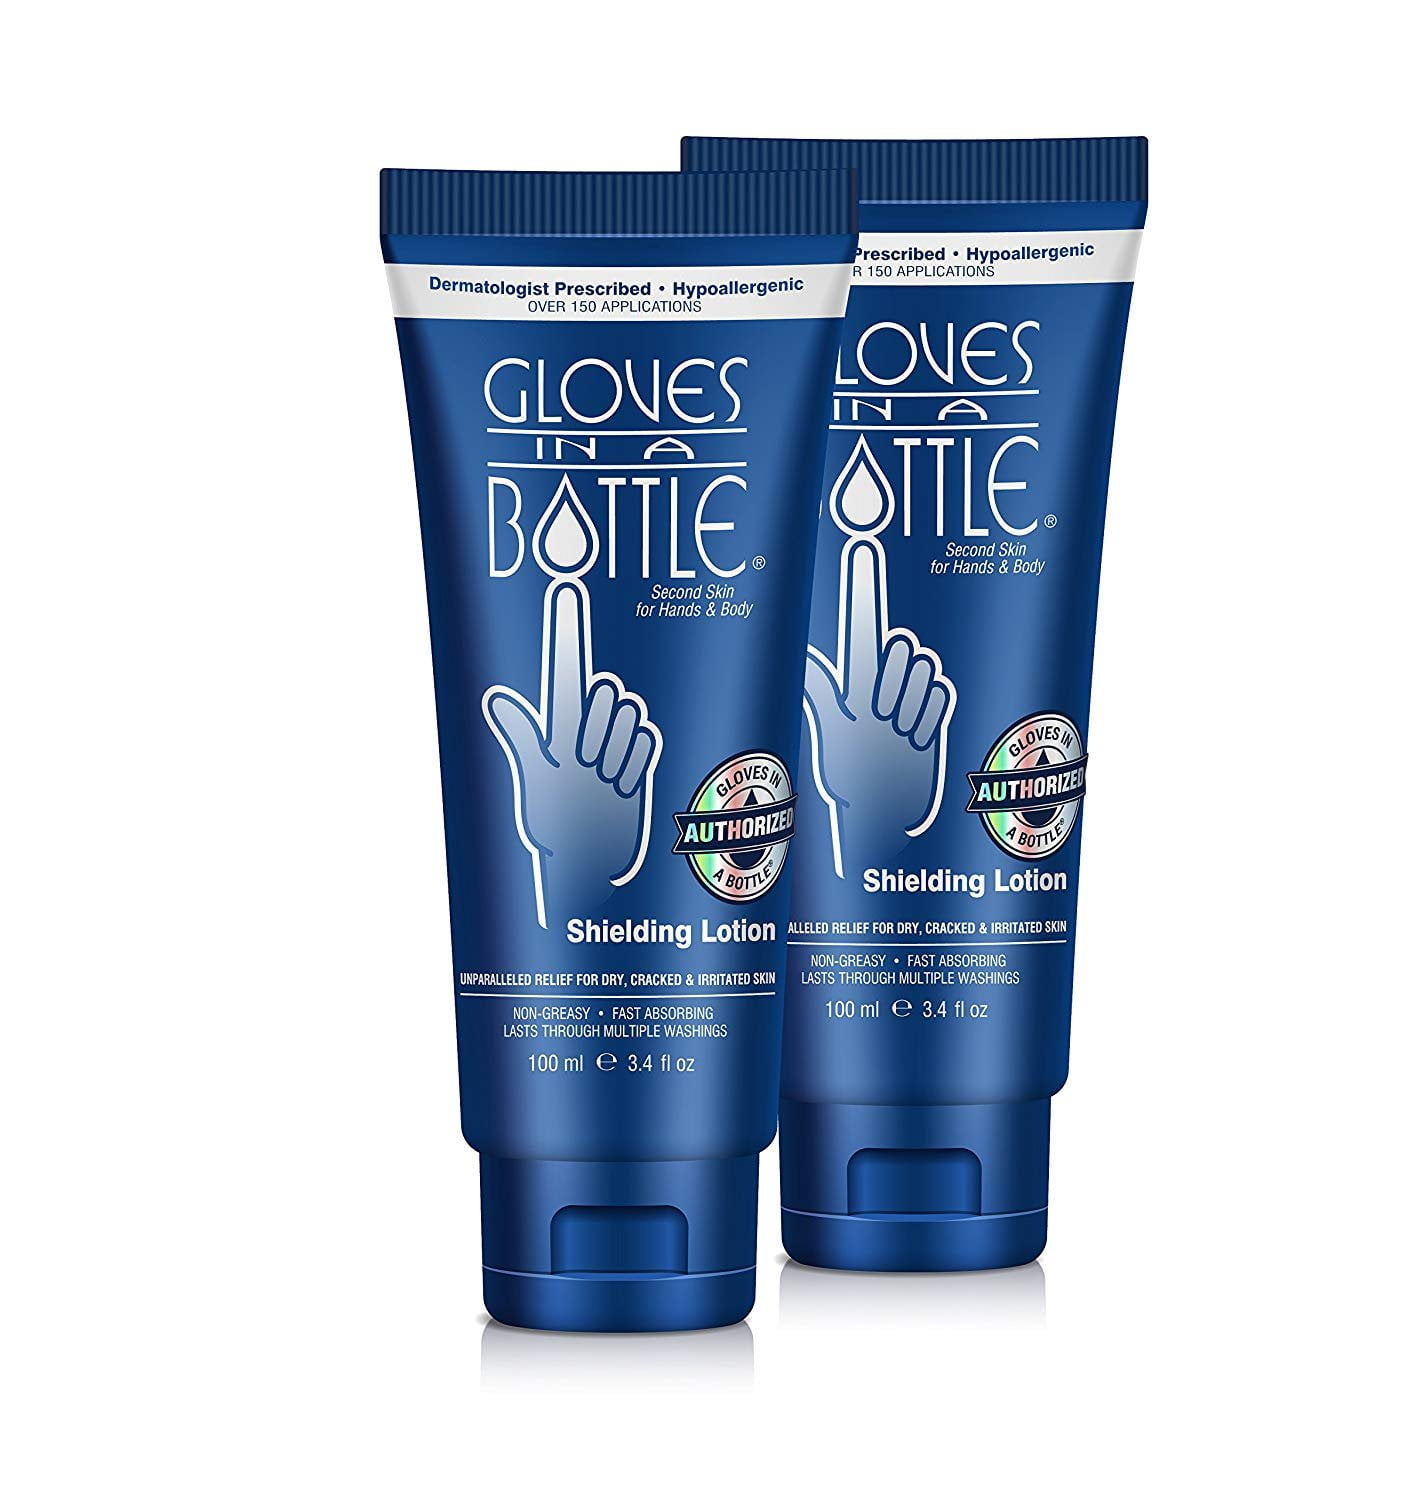 Gloves in A Bottle - Shielding Lotion for Dry Skin, Hand Lotion Travel size, Protects & Restores Dry Cracked Skin 3.4 fl oz Pack of 1, Botanical